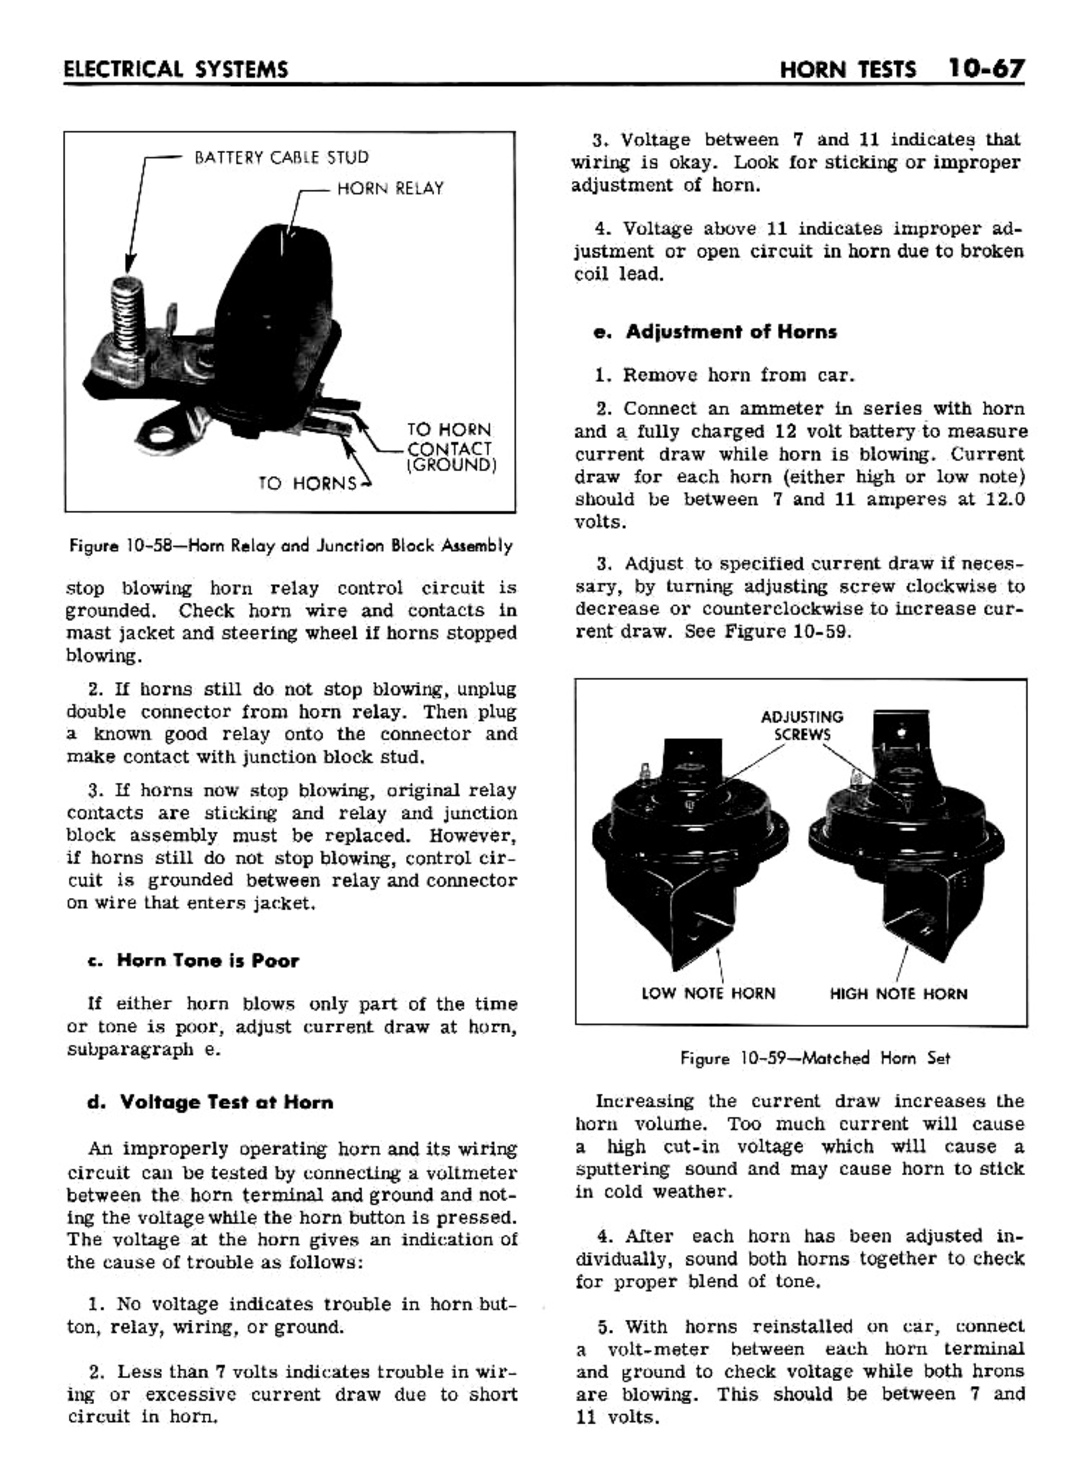 n_10 1961 Buick Shop Manual - Electrical Systems-067-067.jpg